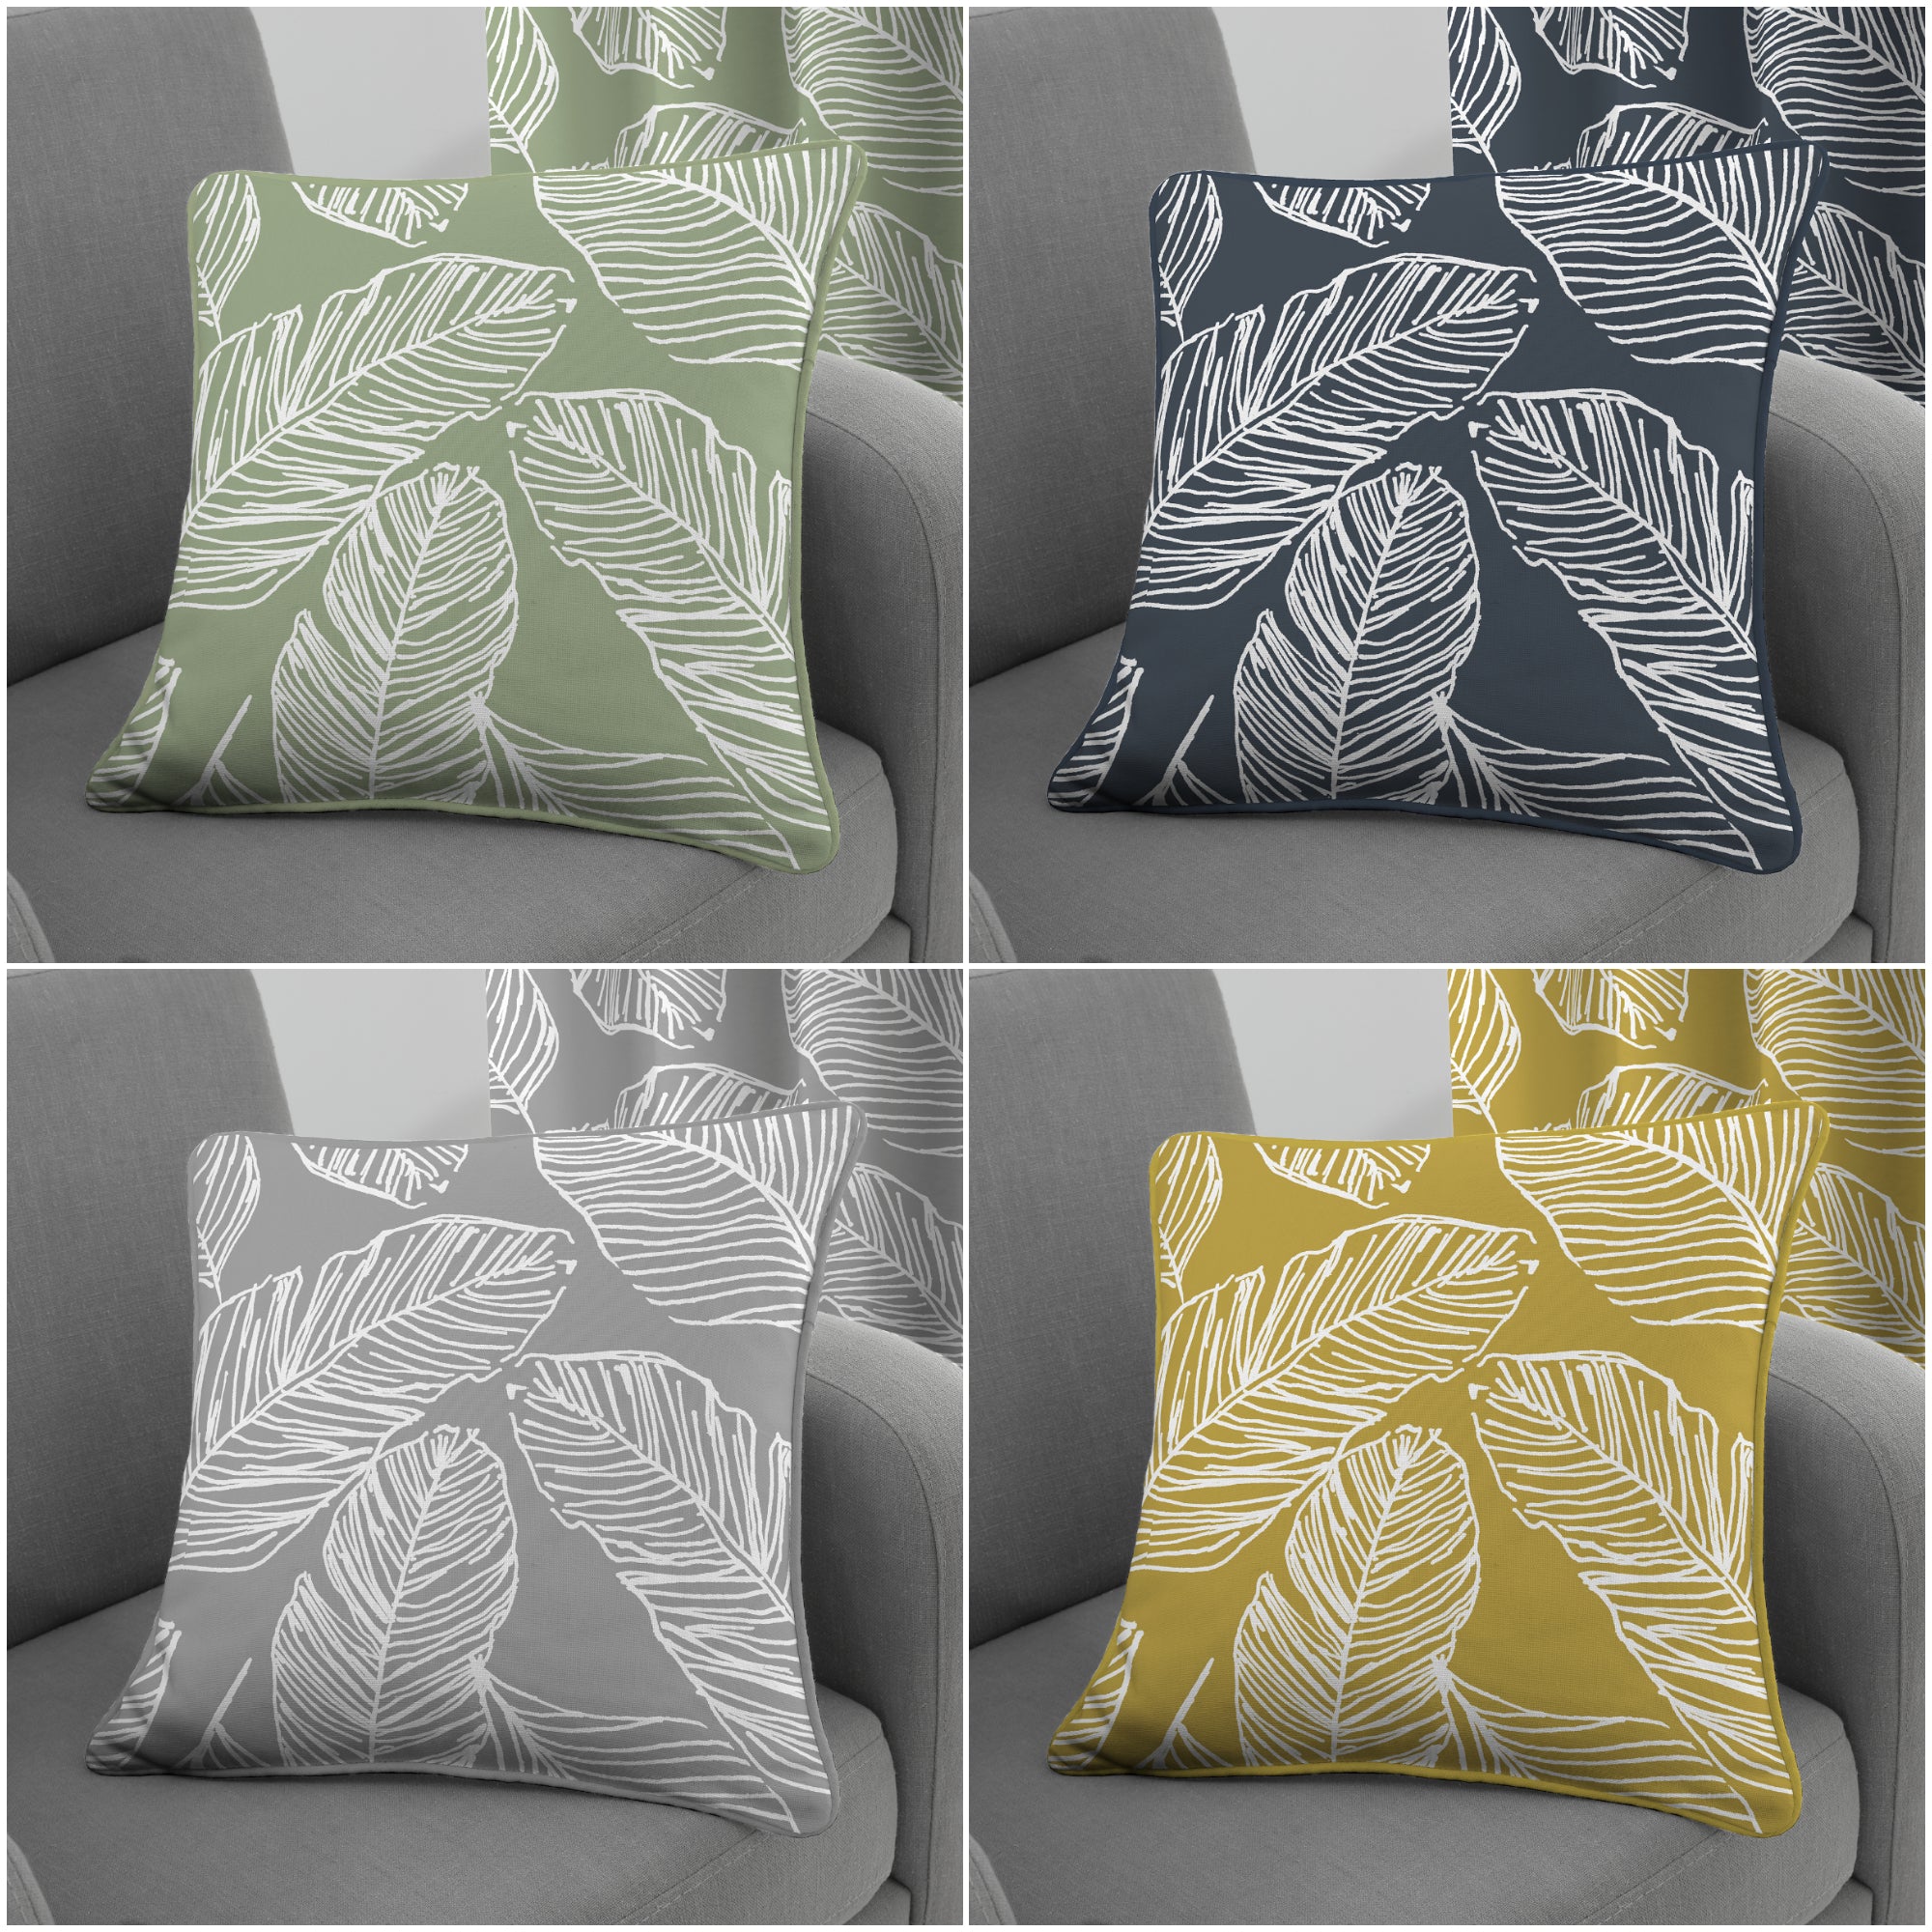 Matteo - 100% Cotton Filled Cushion - by Fusion